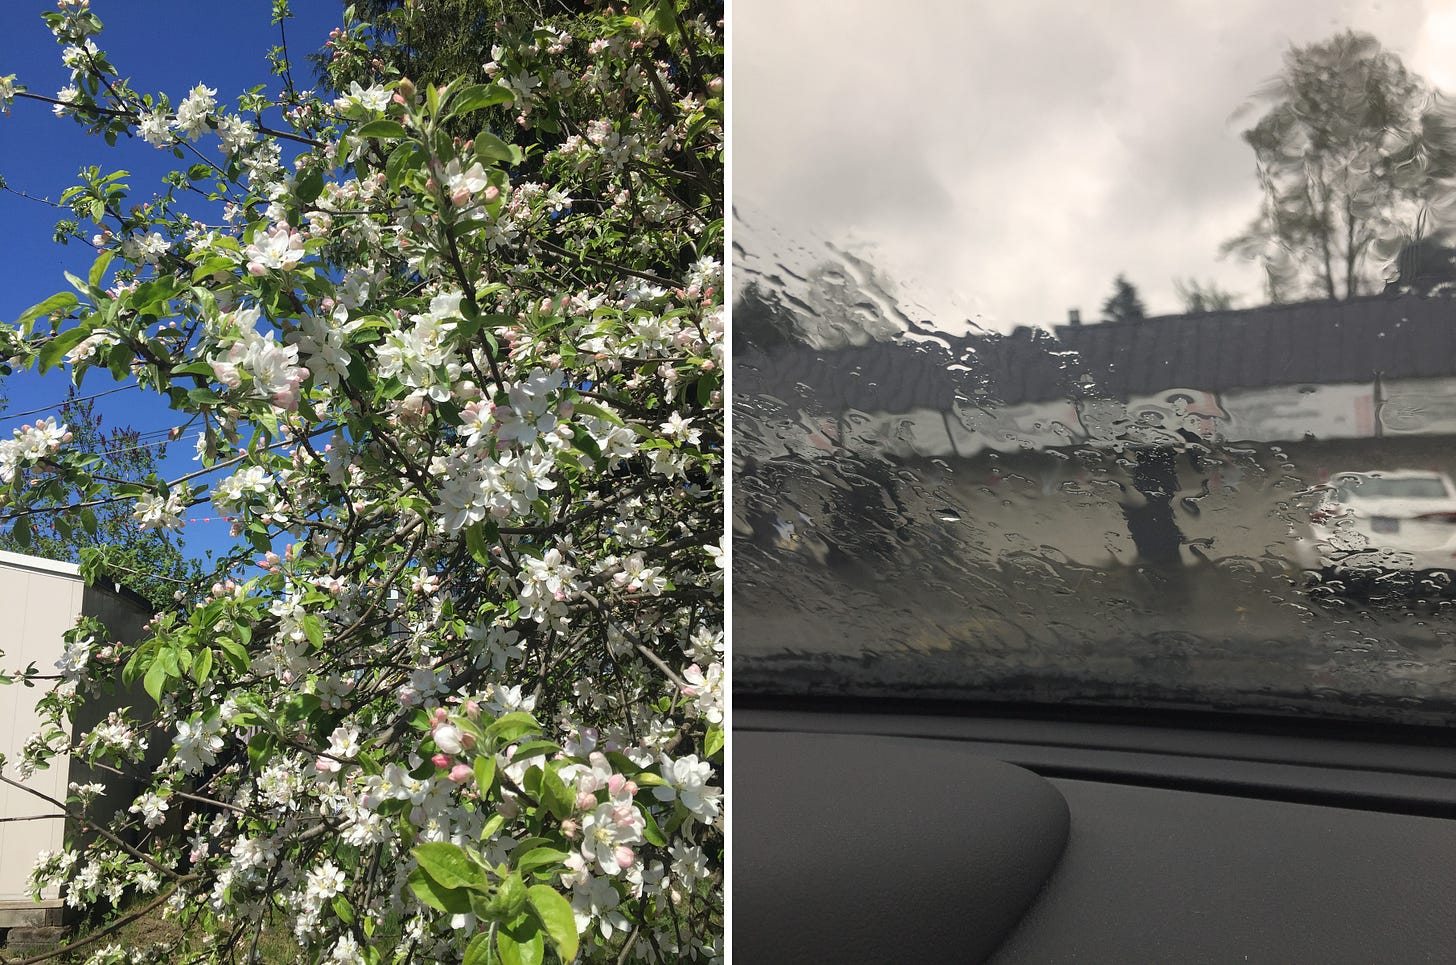 left image: a blossoming apple tree with a blue sky in the background. right image: from a car dashboard, a rainy windshield with a drive-in menu visible in the background.